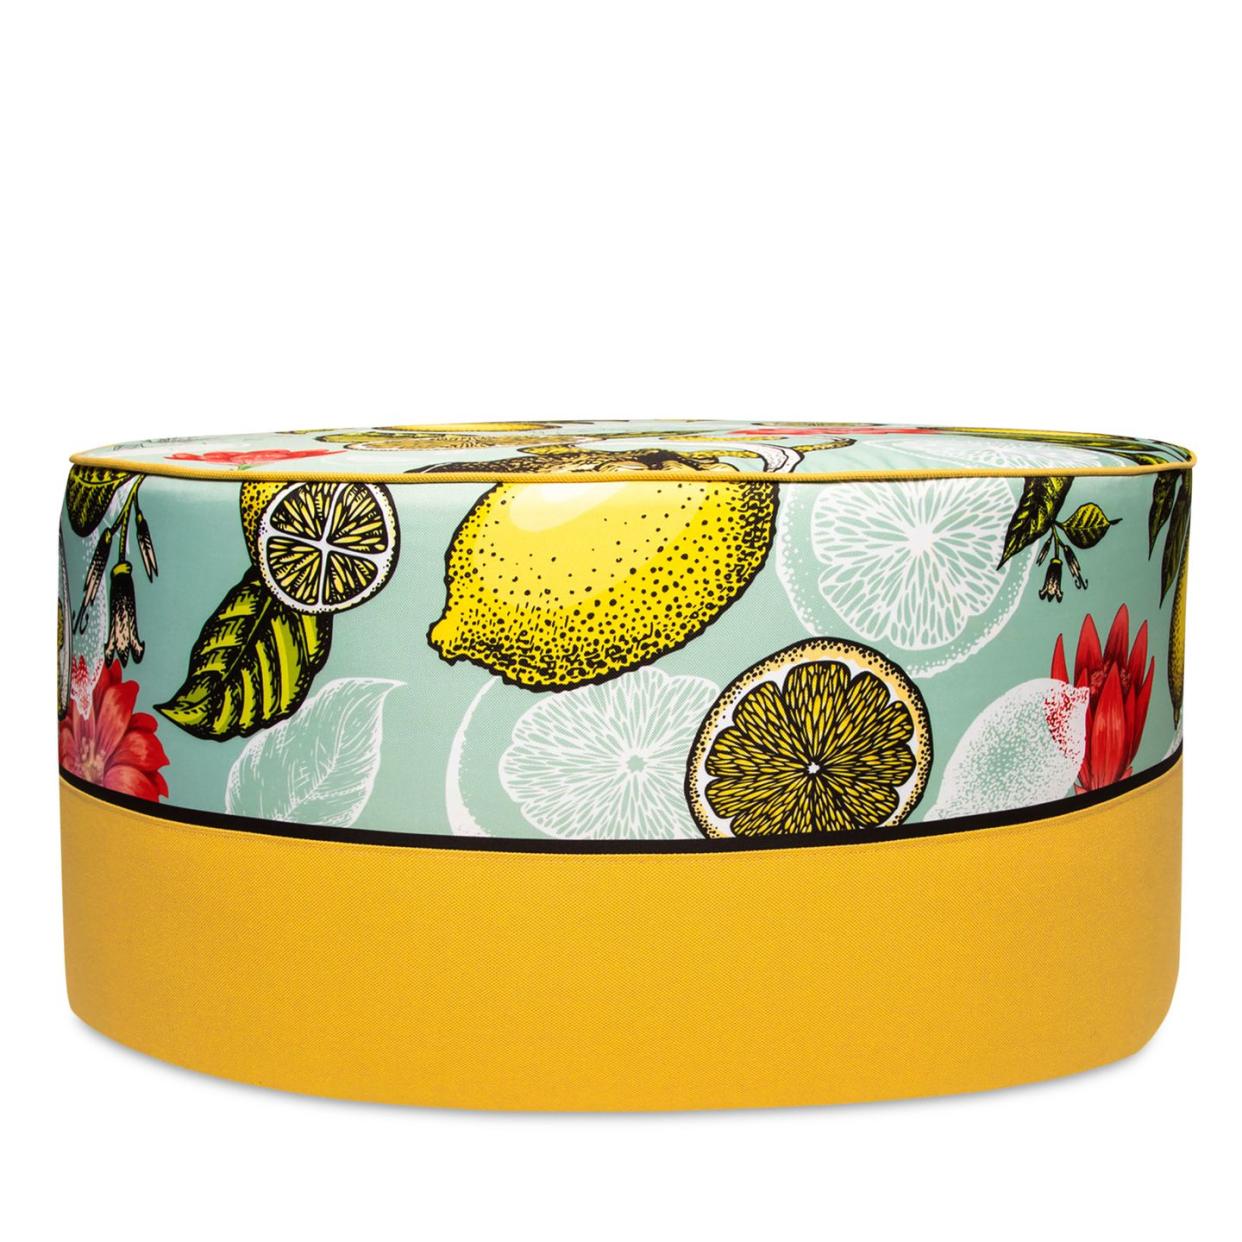 ottoman pouf with a lemon yellow bottom and a patterened top with artistic stylized funky lemon slices and whole lemon design